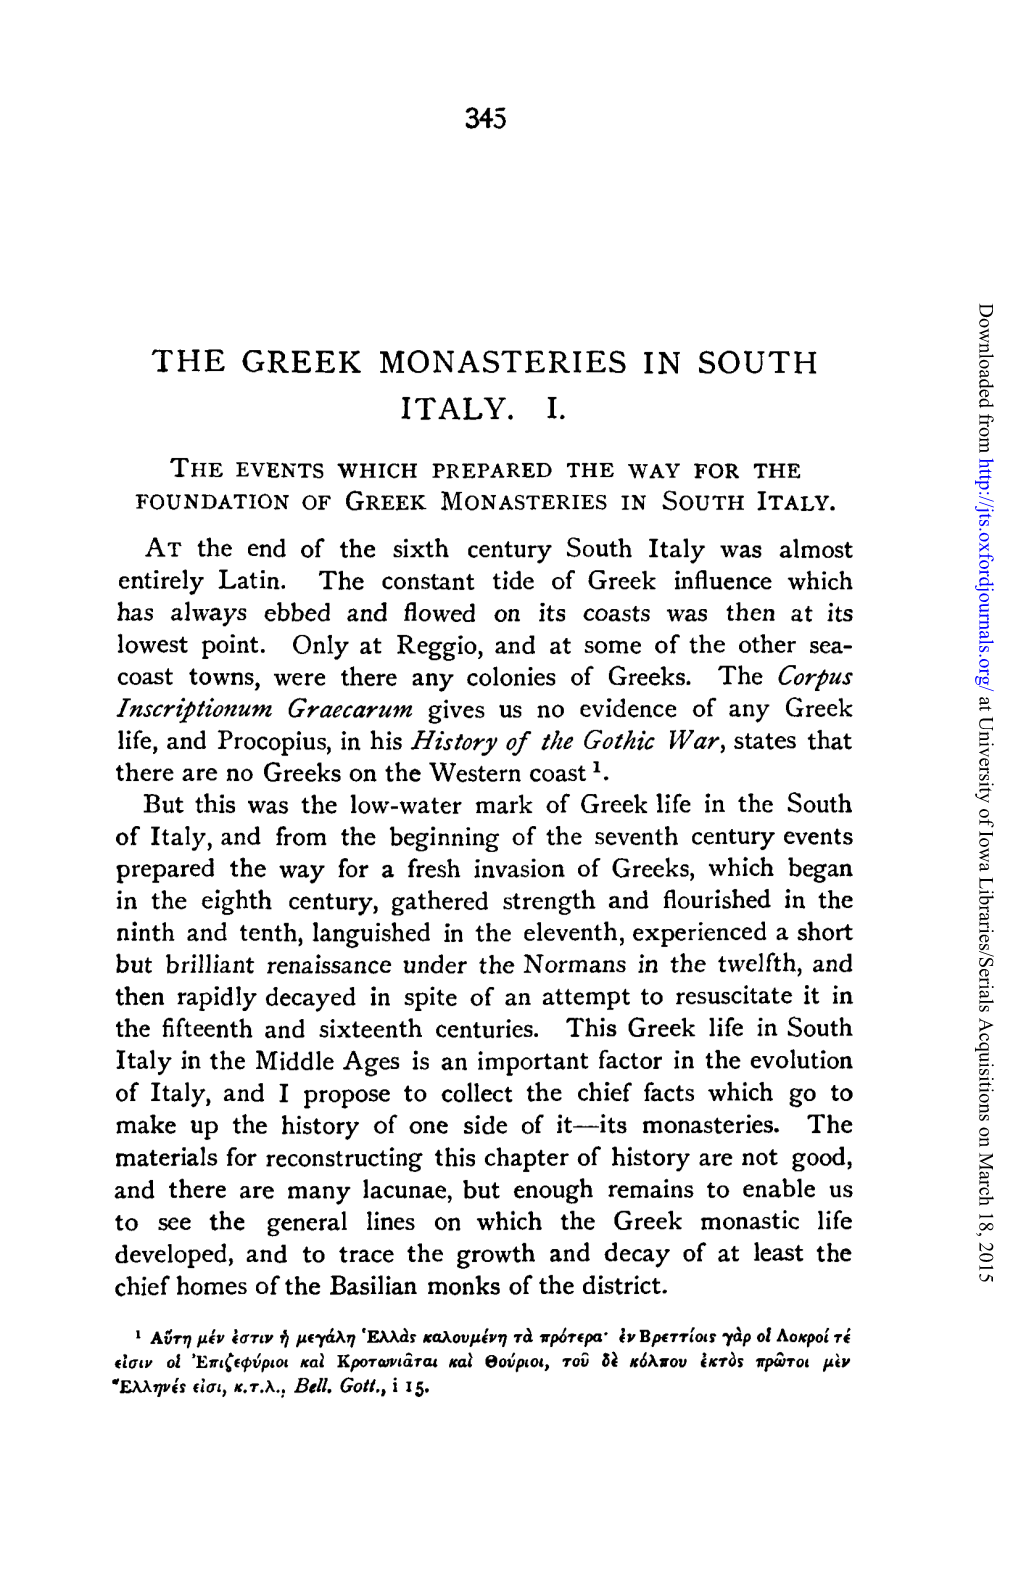 The Greek Monasteries in South Italy. I. the Events Which Prepared the Way for the Foundation of Greek Monasteries in South Italy